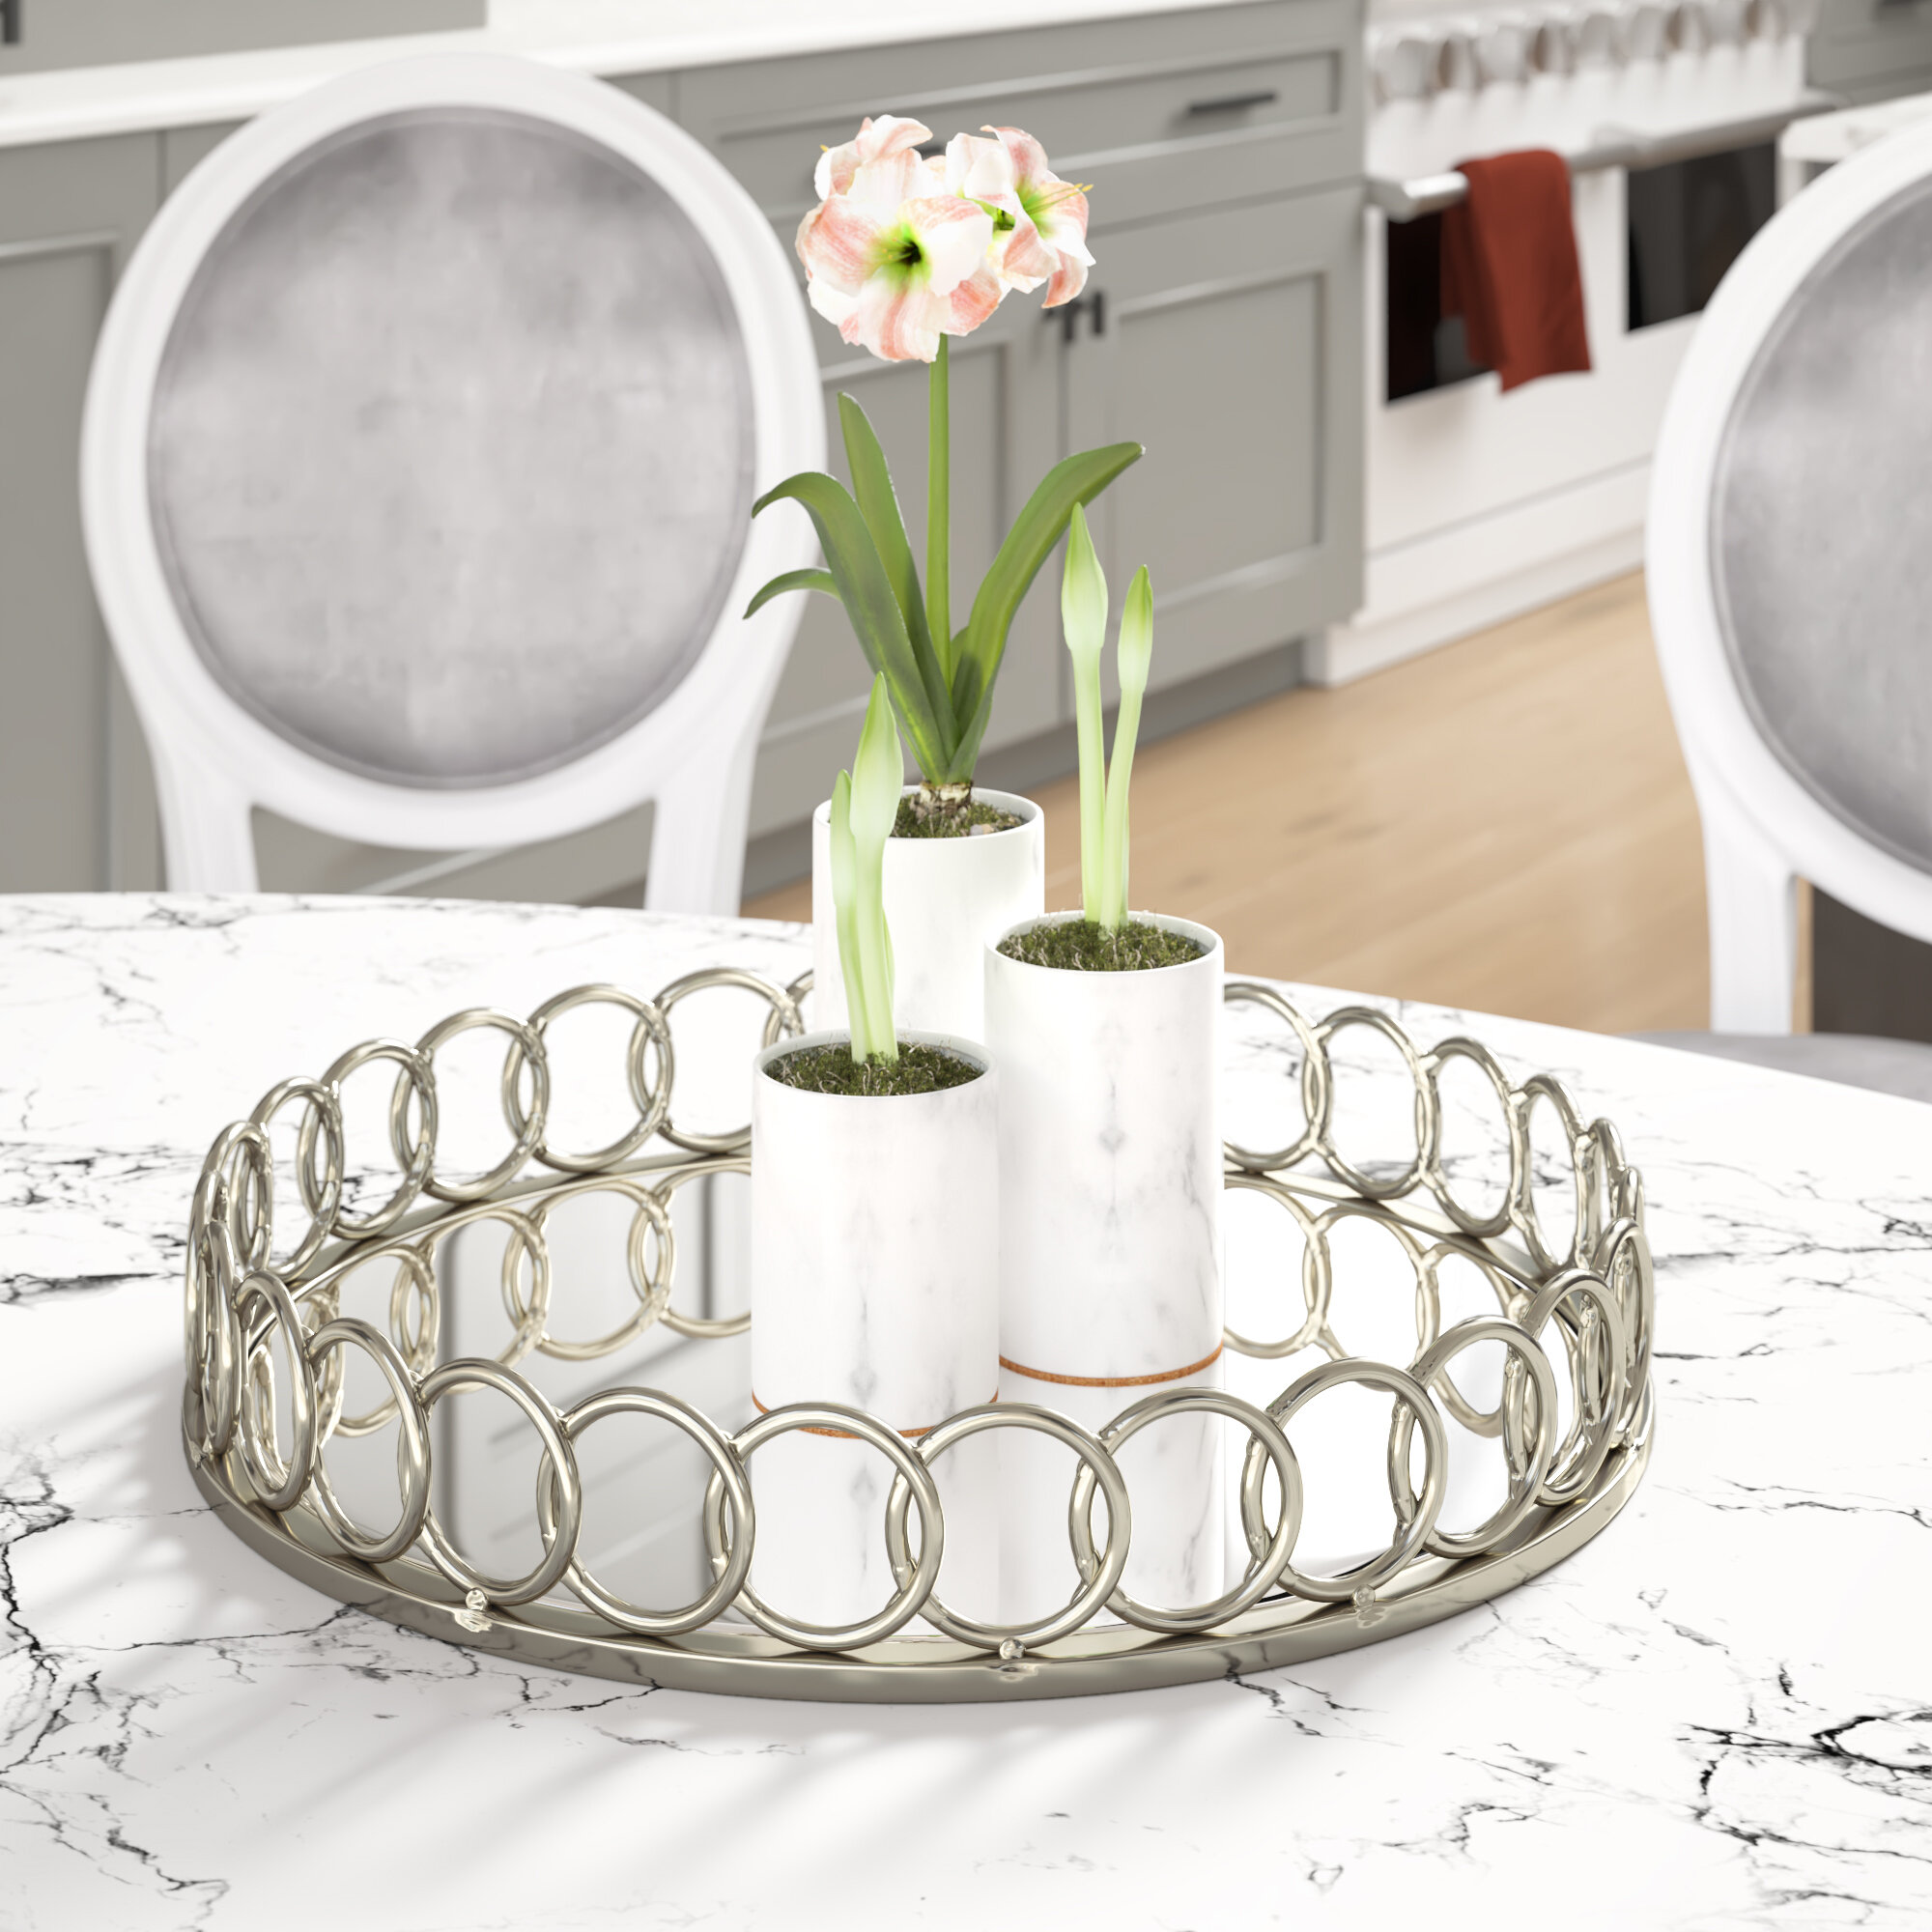 Gold Table Bathroom & More American Atelier Lace Electroplated Round Mirror Decorative Tray with Metal Rim for Dresser Vanity 